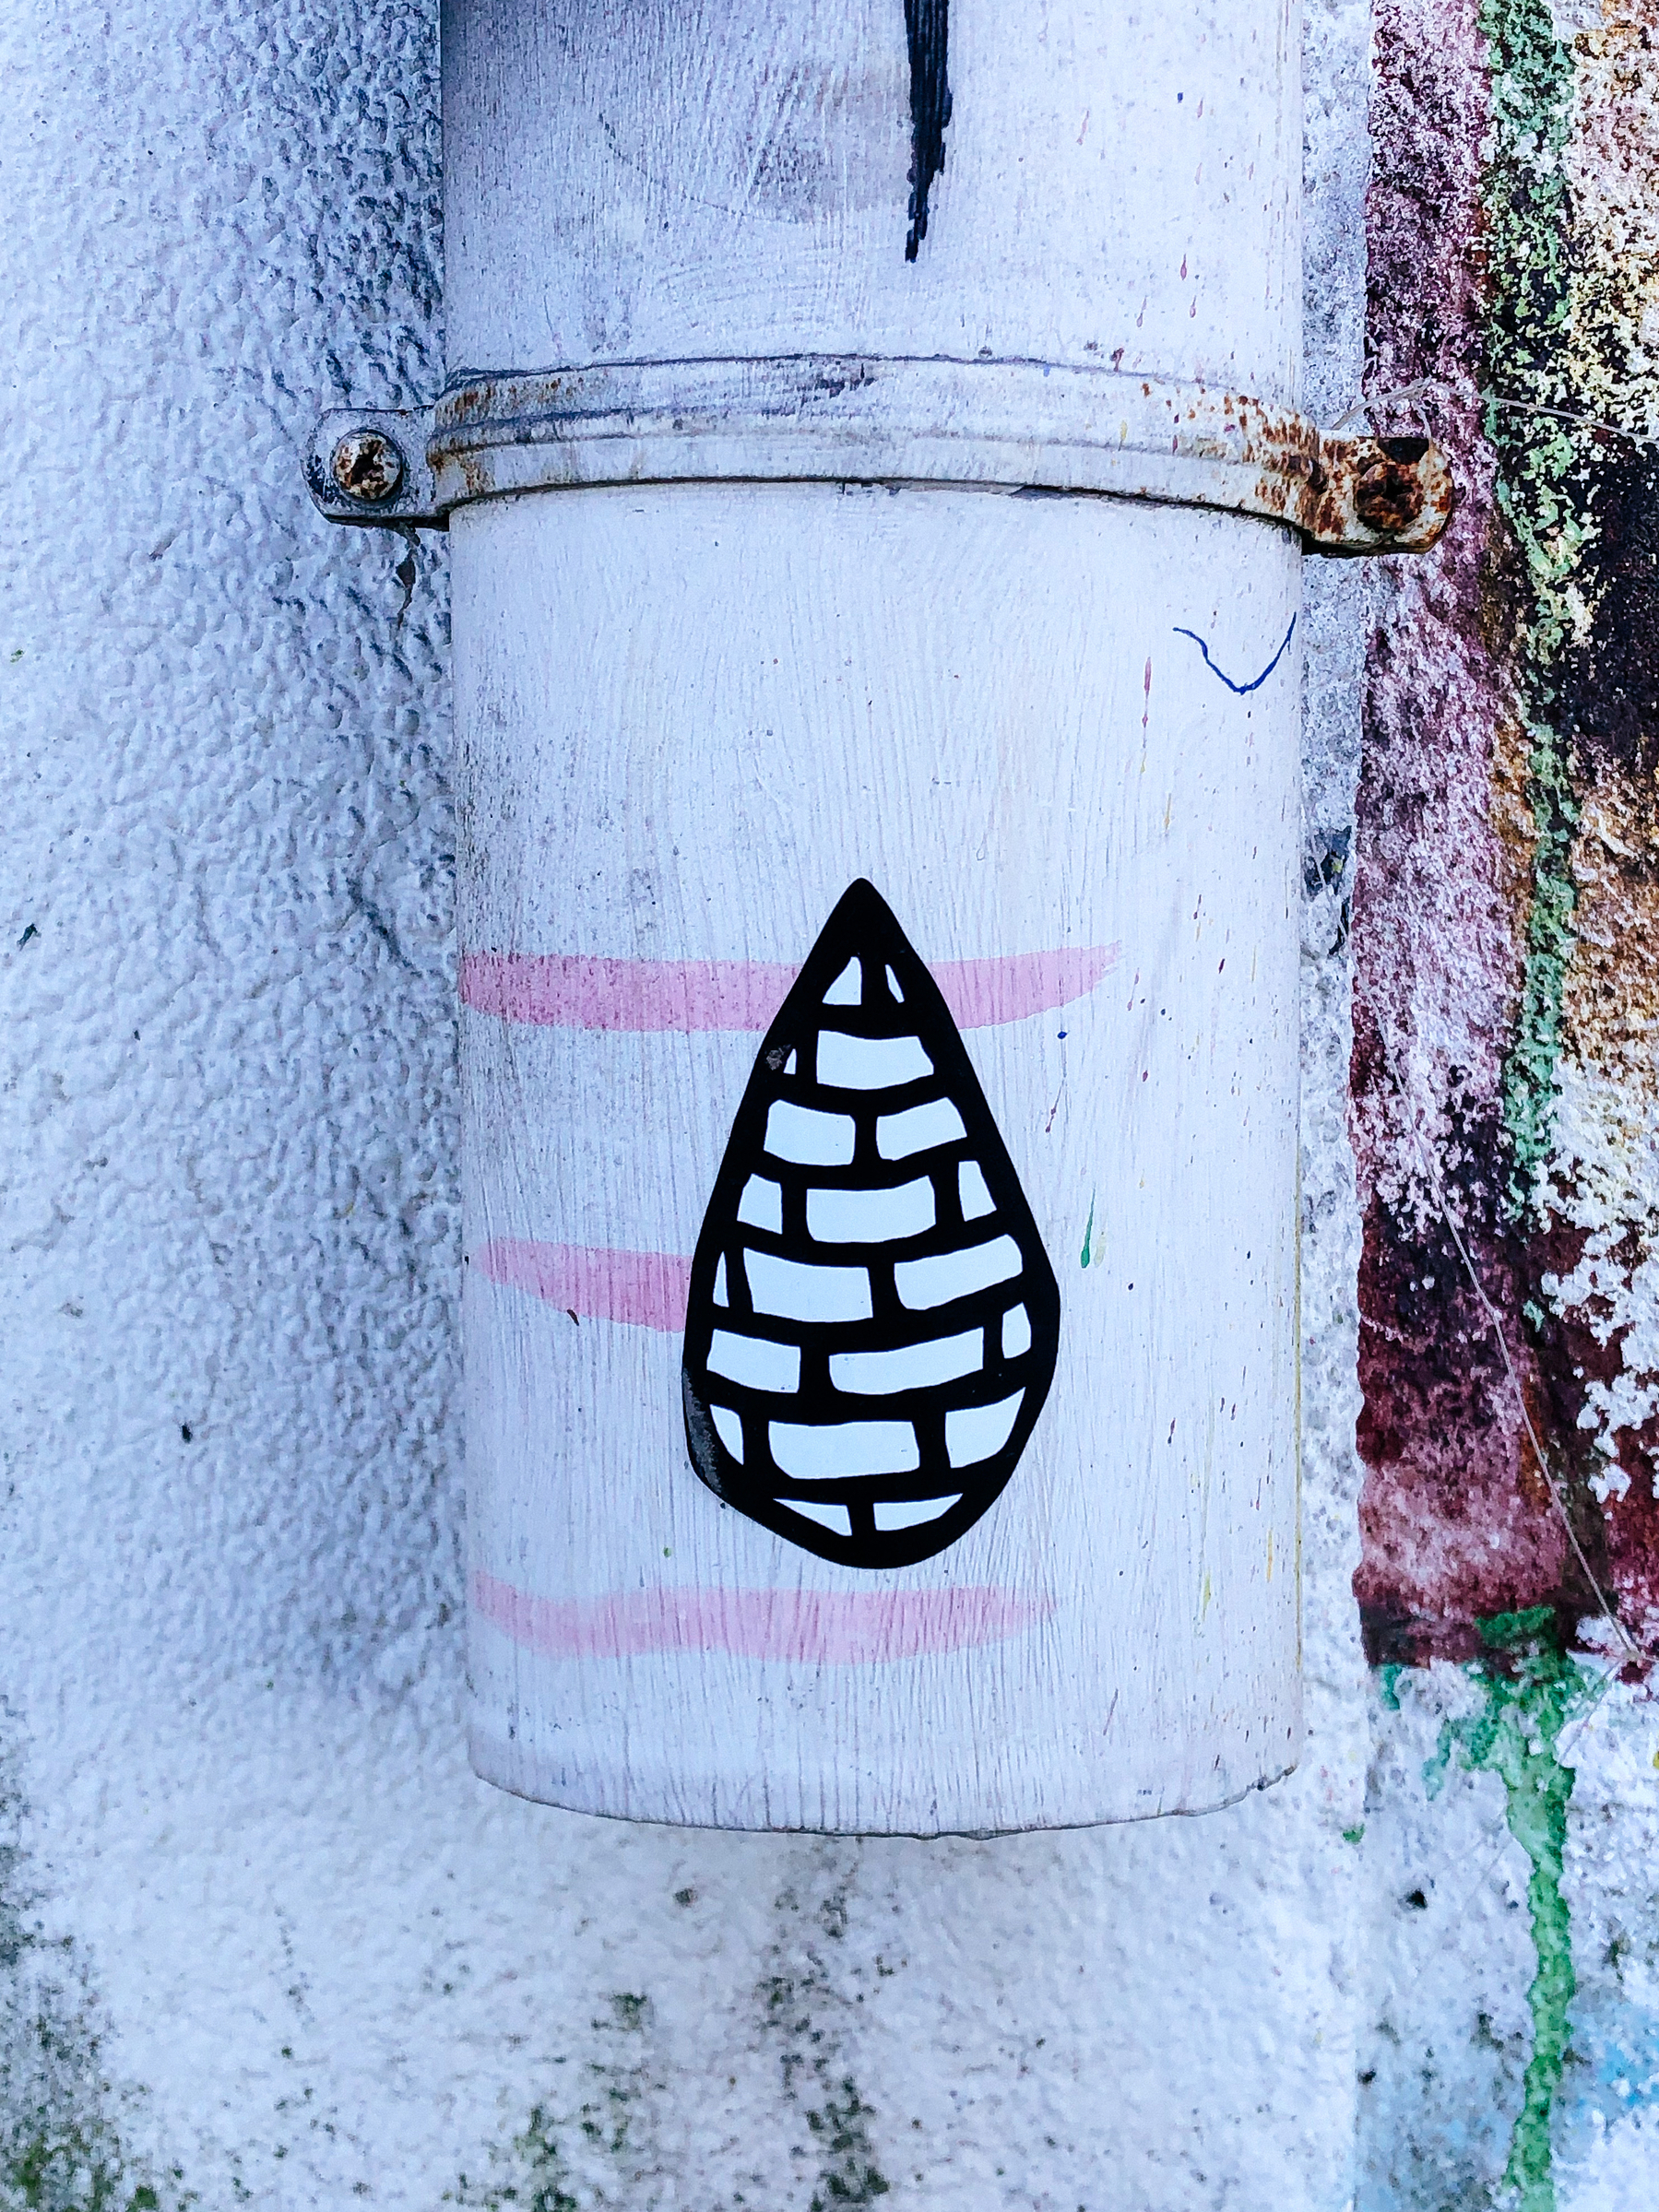 A sticker of what looks like a drop made of bricks.